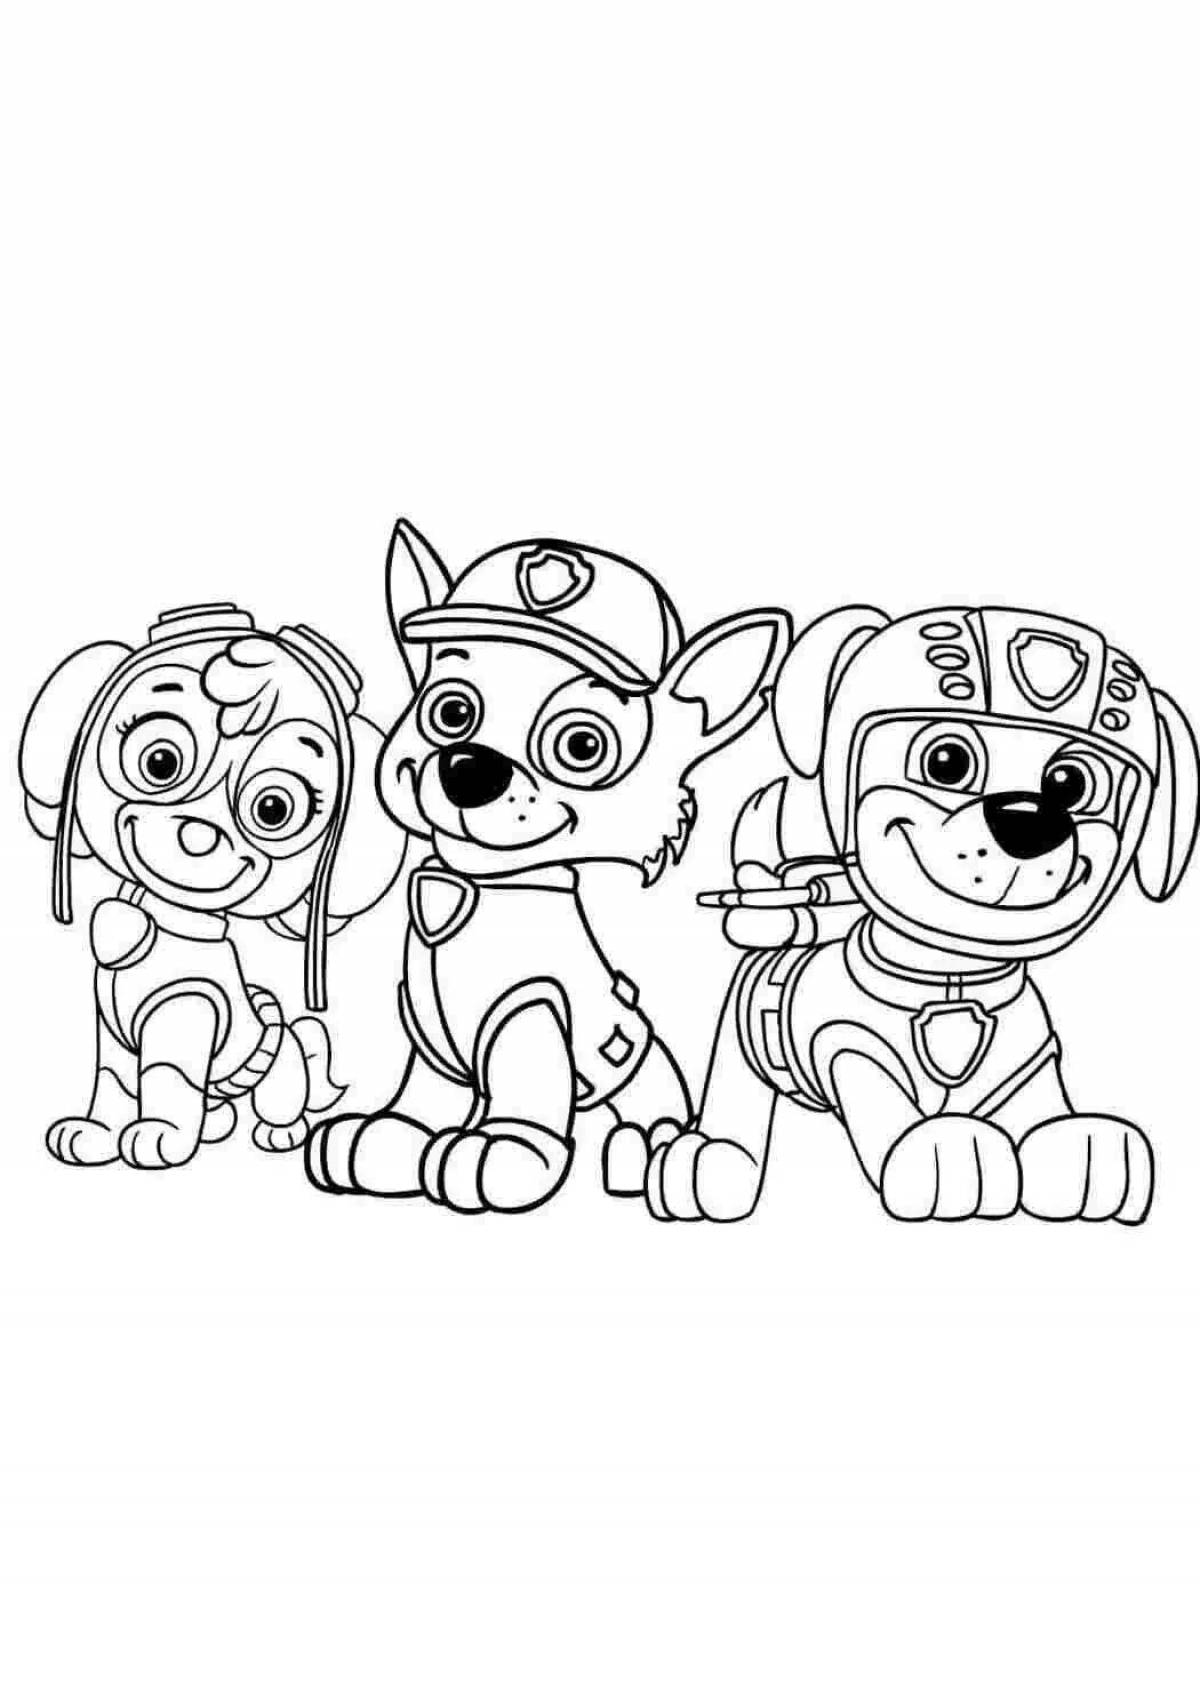 Paw Patrol bright coloring book for kids 5-6 years old